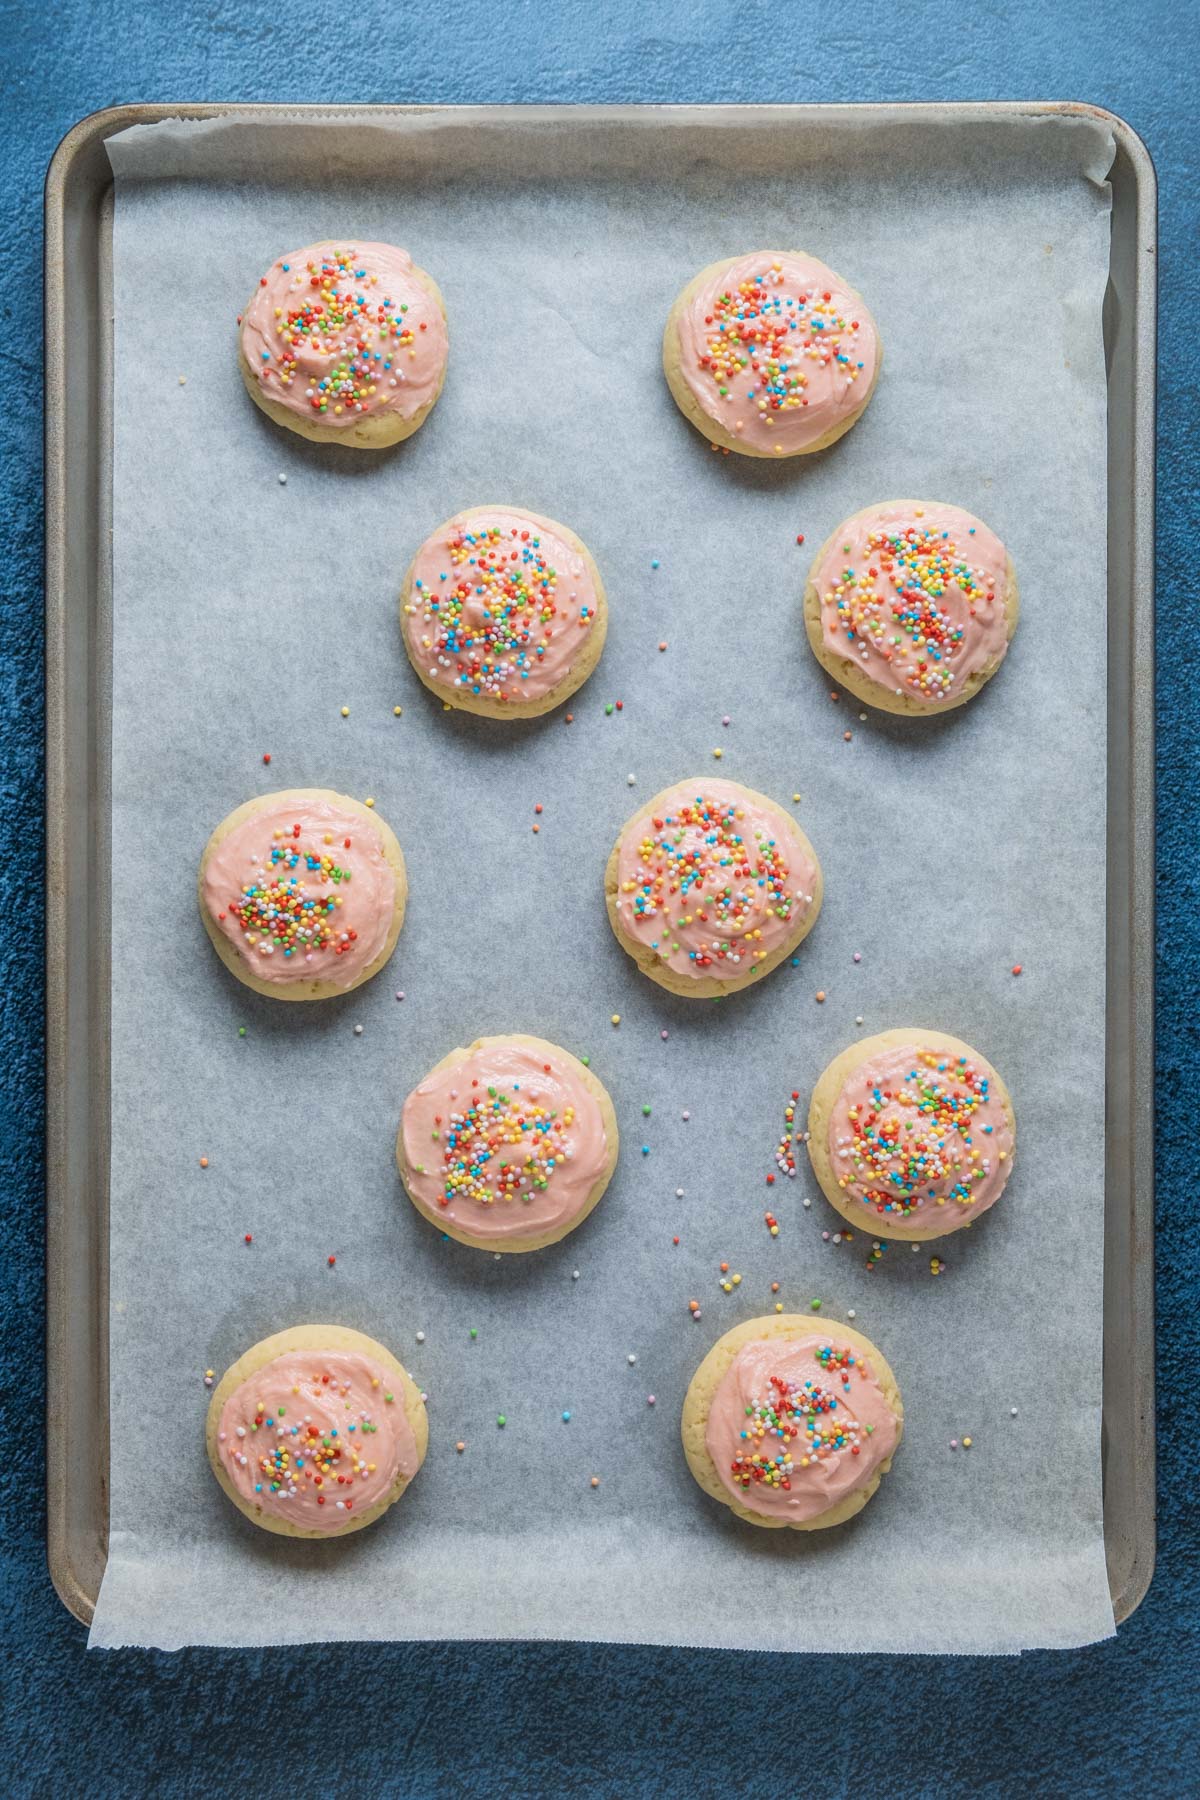 Frosted and decorated sugar cookies on a parchment lined baking sheet.